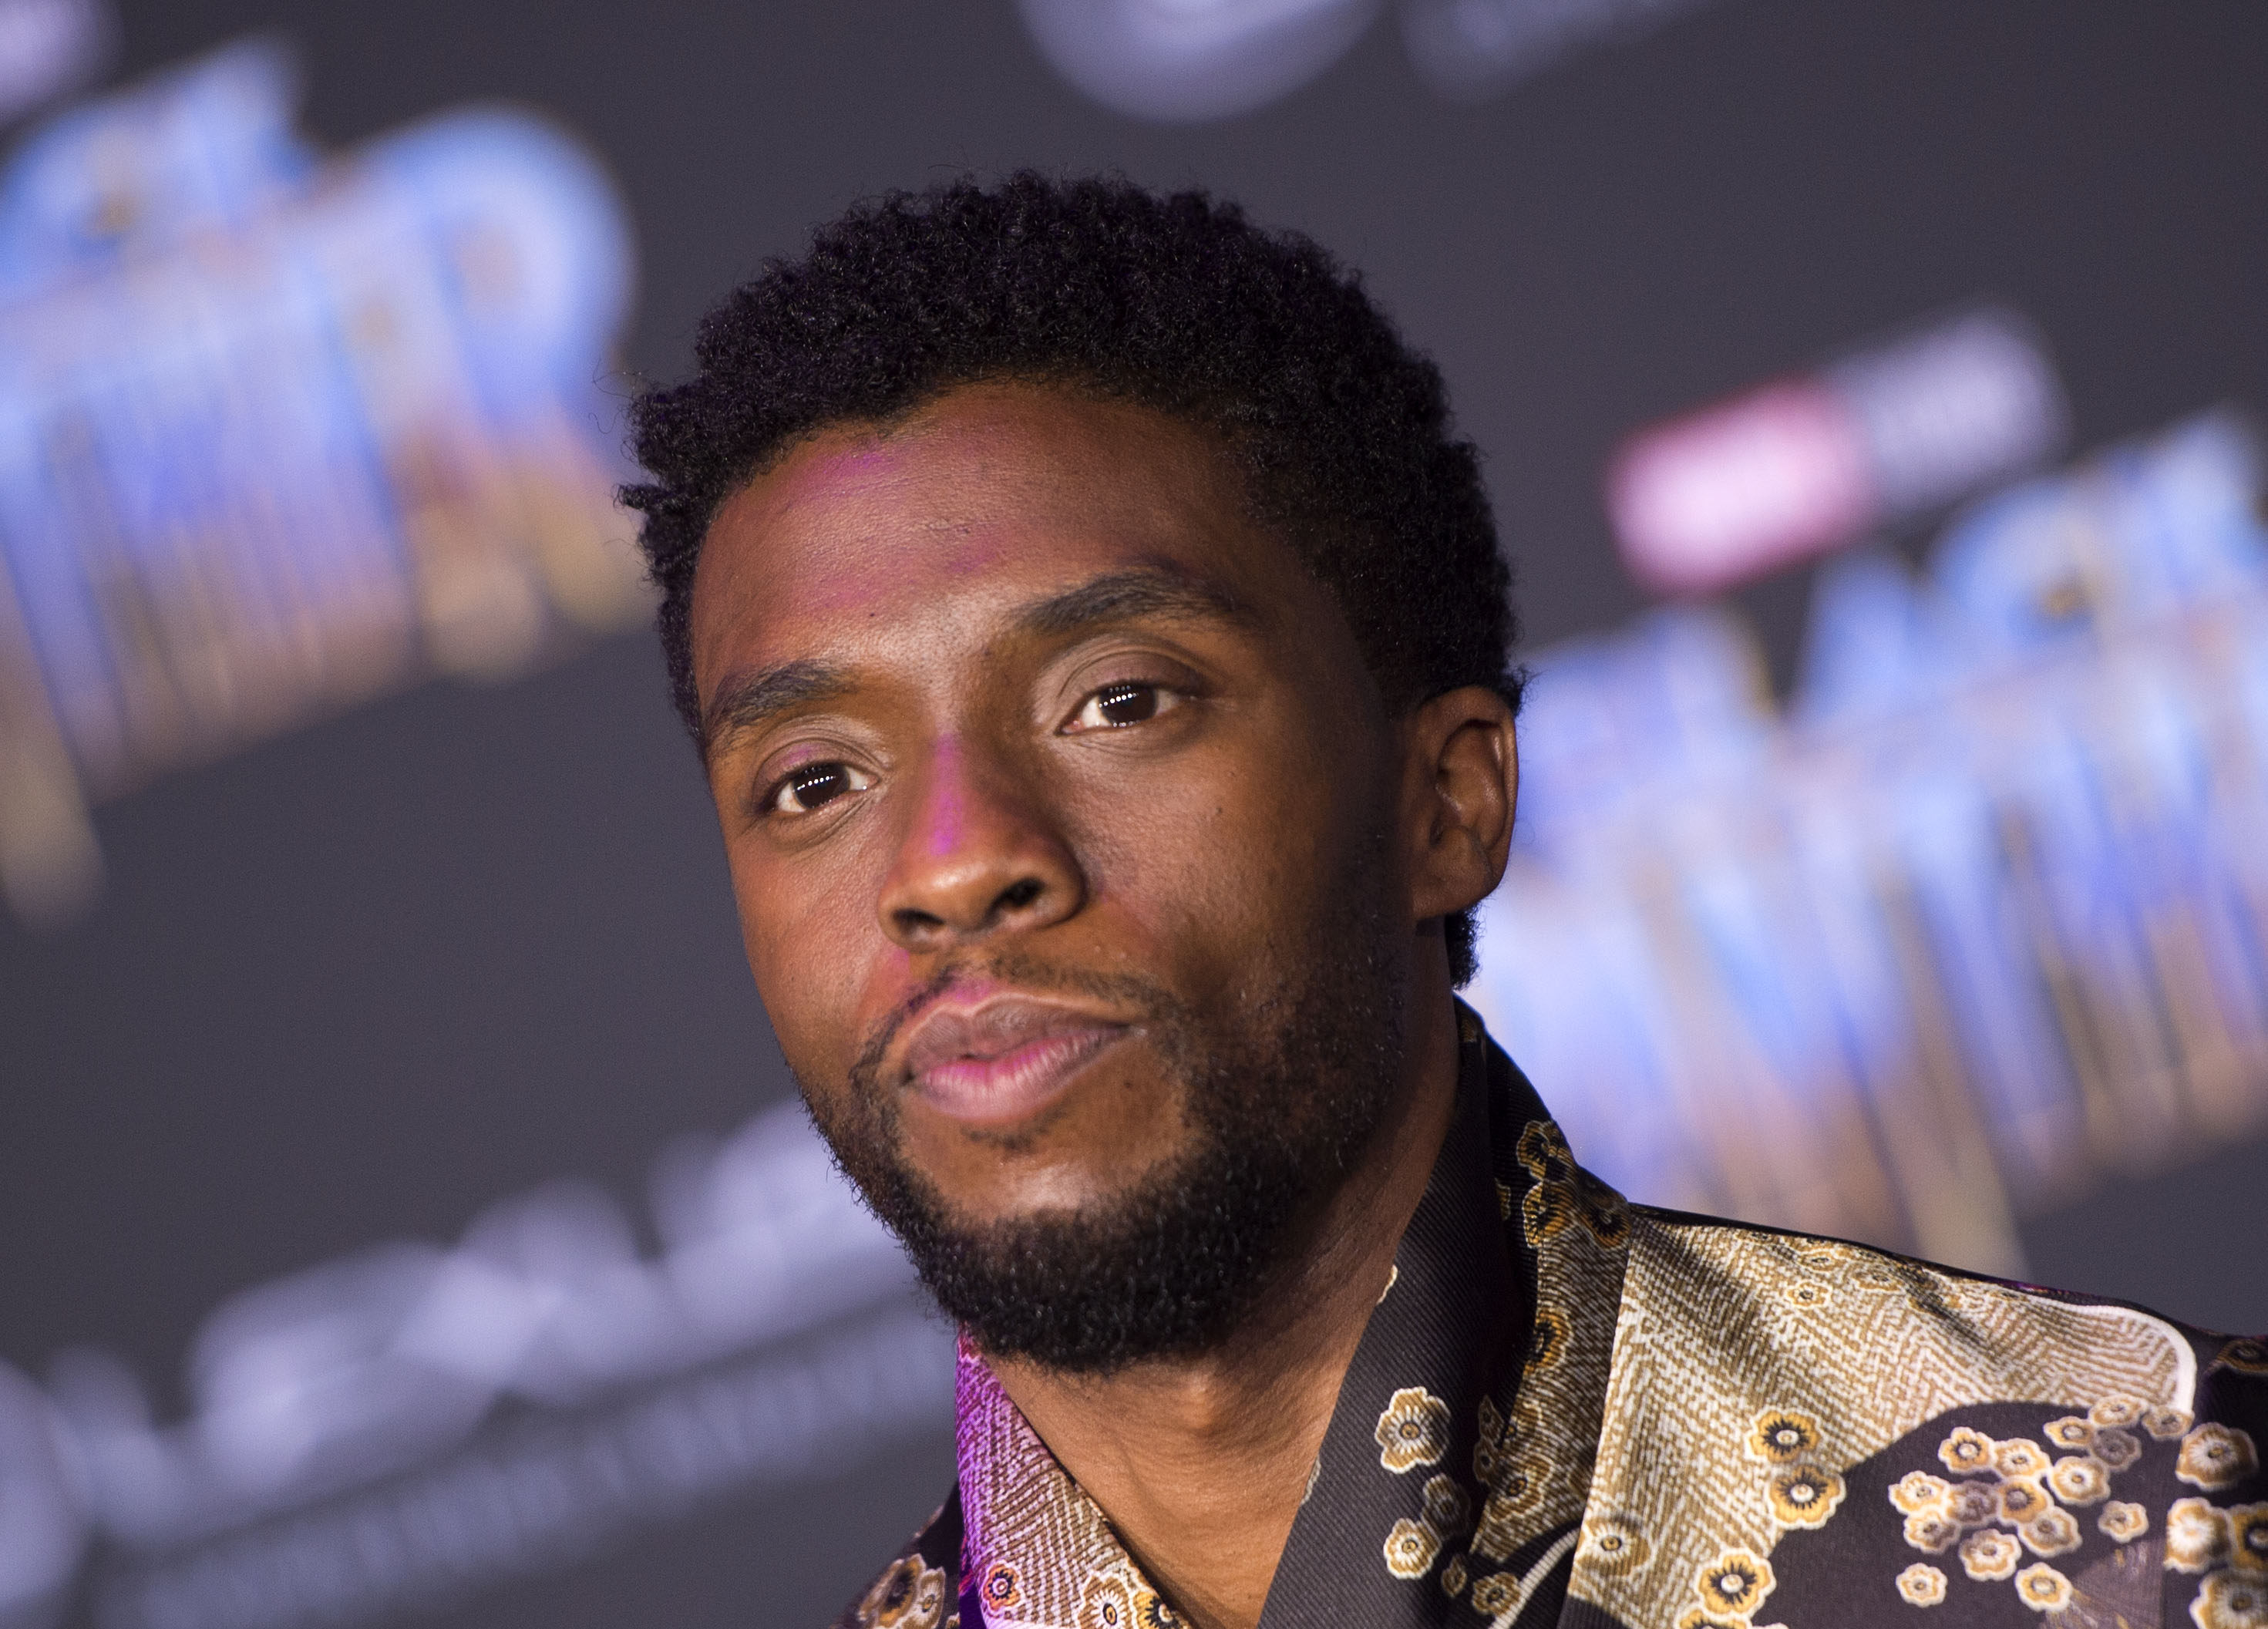 Actor Chadwick Boseman died from cancer aged 43. Photo: AFP